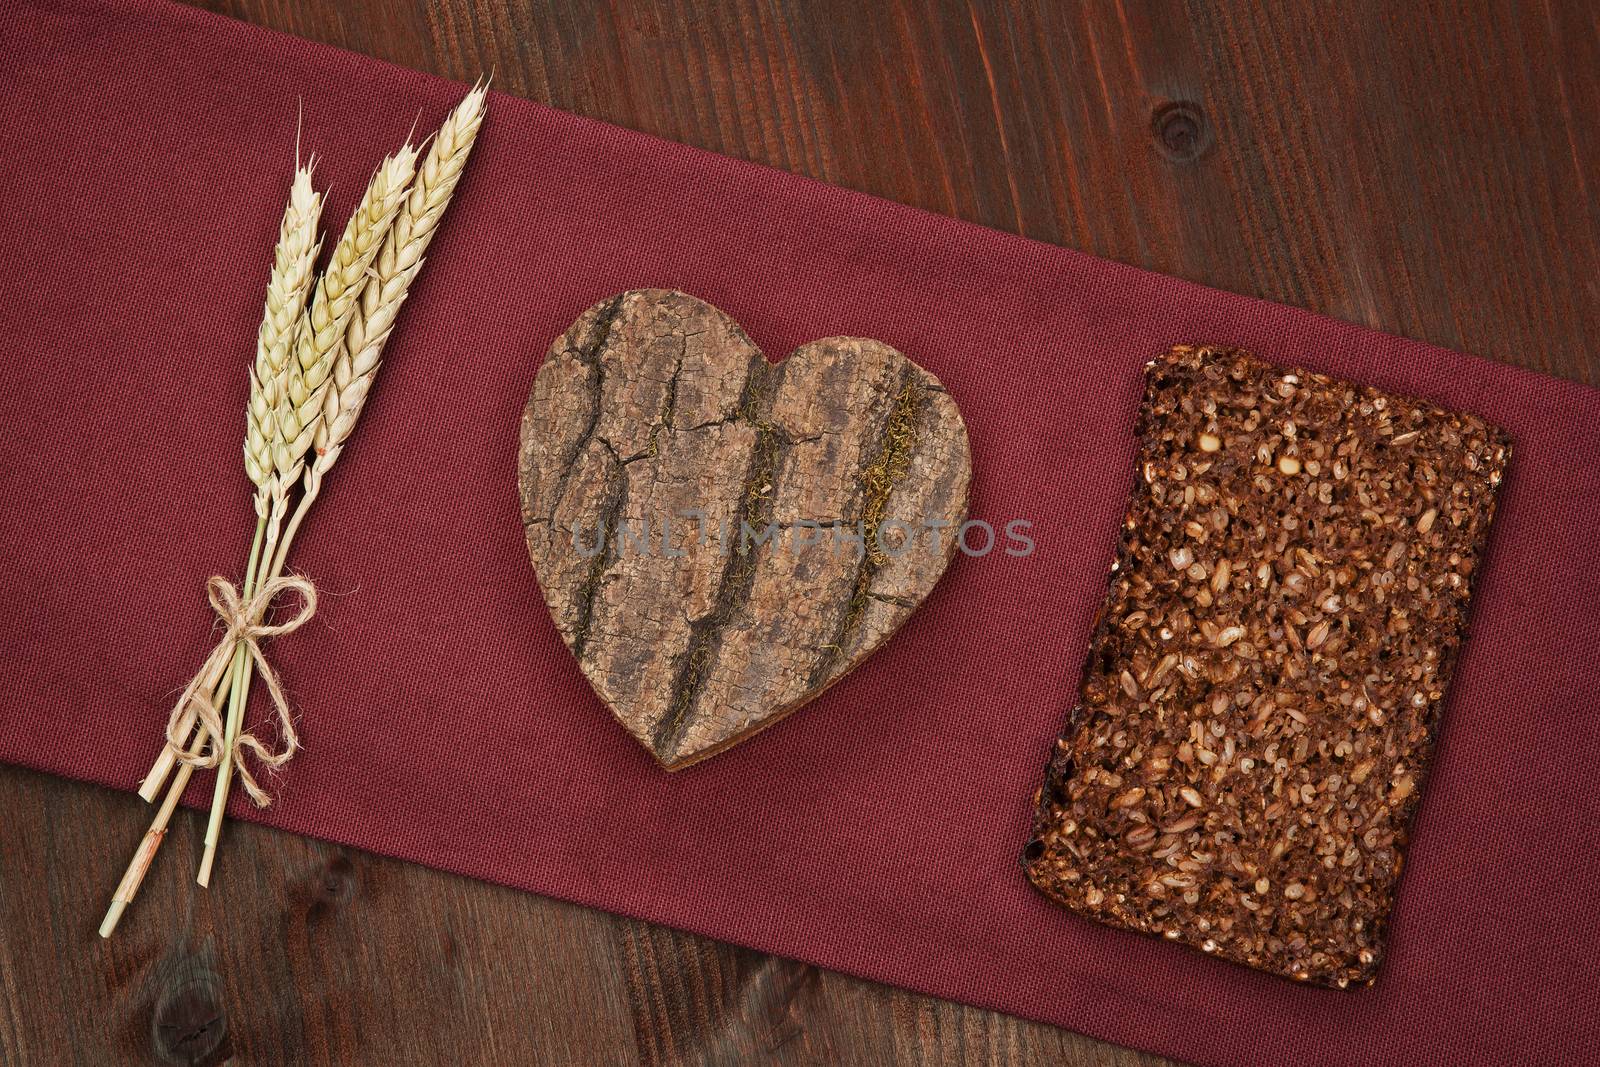 I love whole grain dark bread made of wheat, wooden heart and dark bread slice. Healthy eating concept.